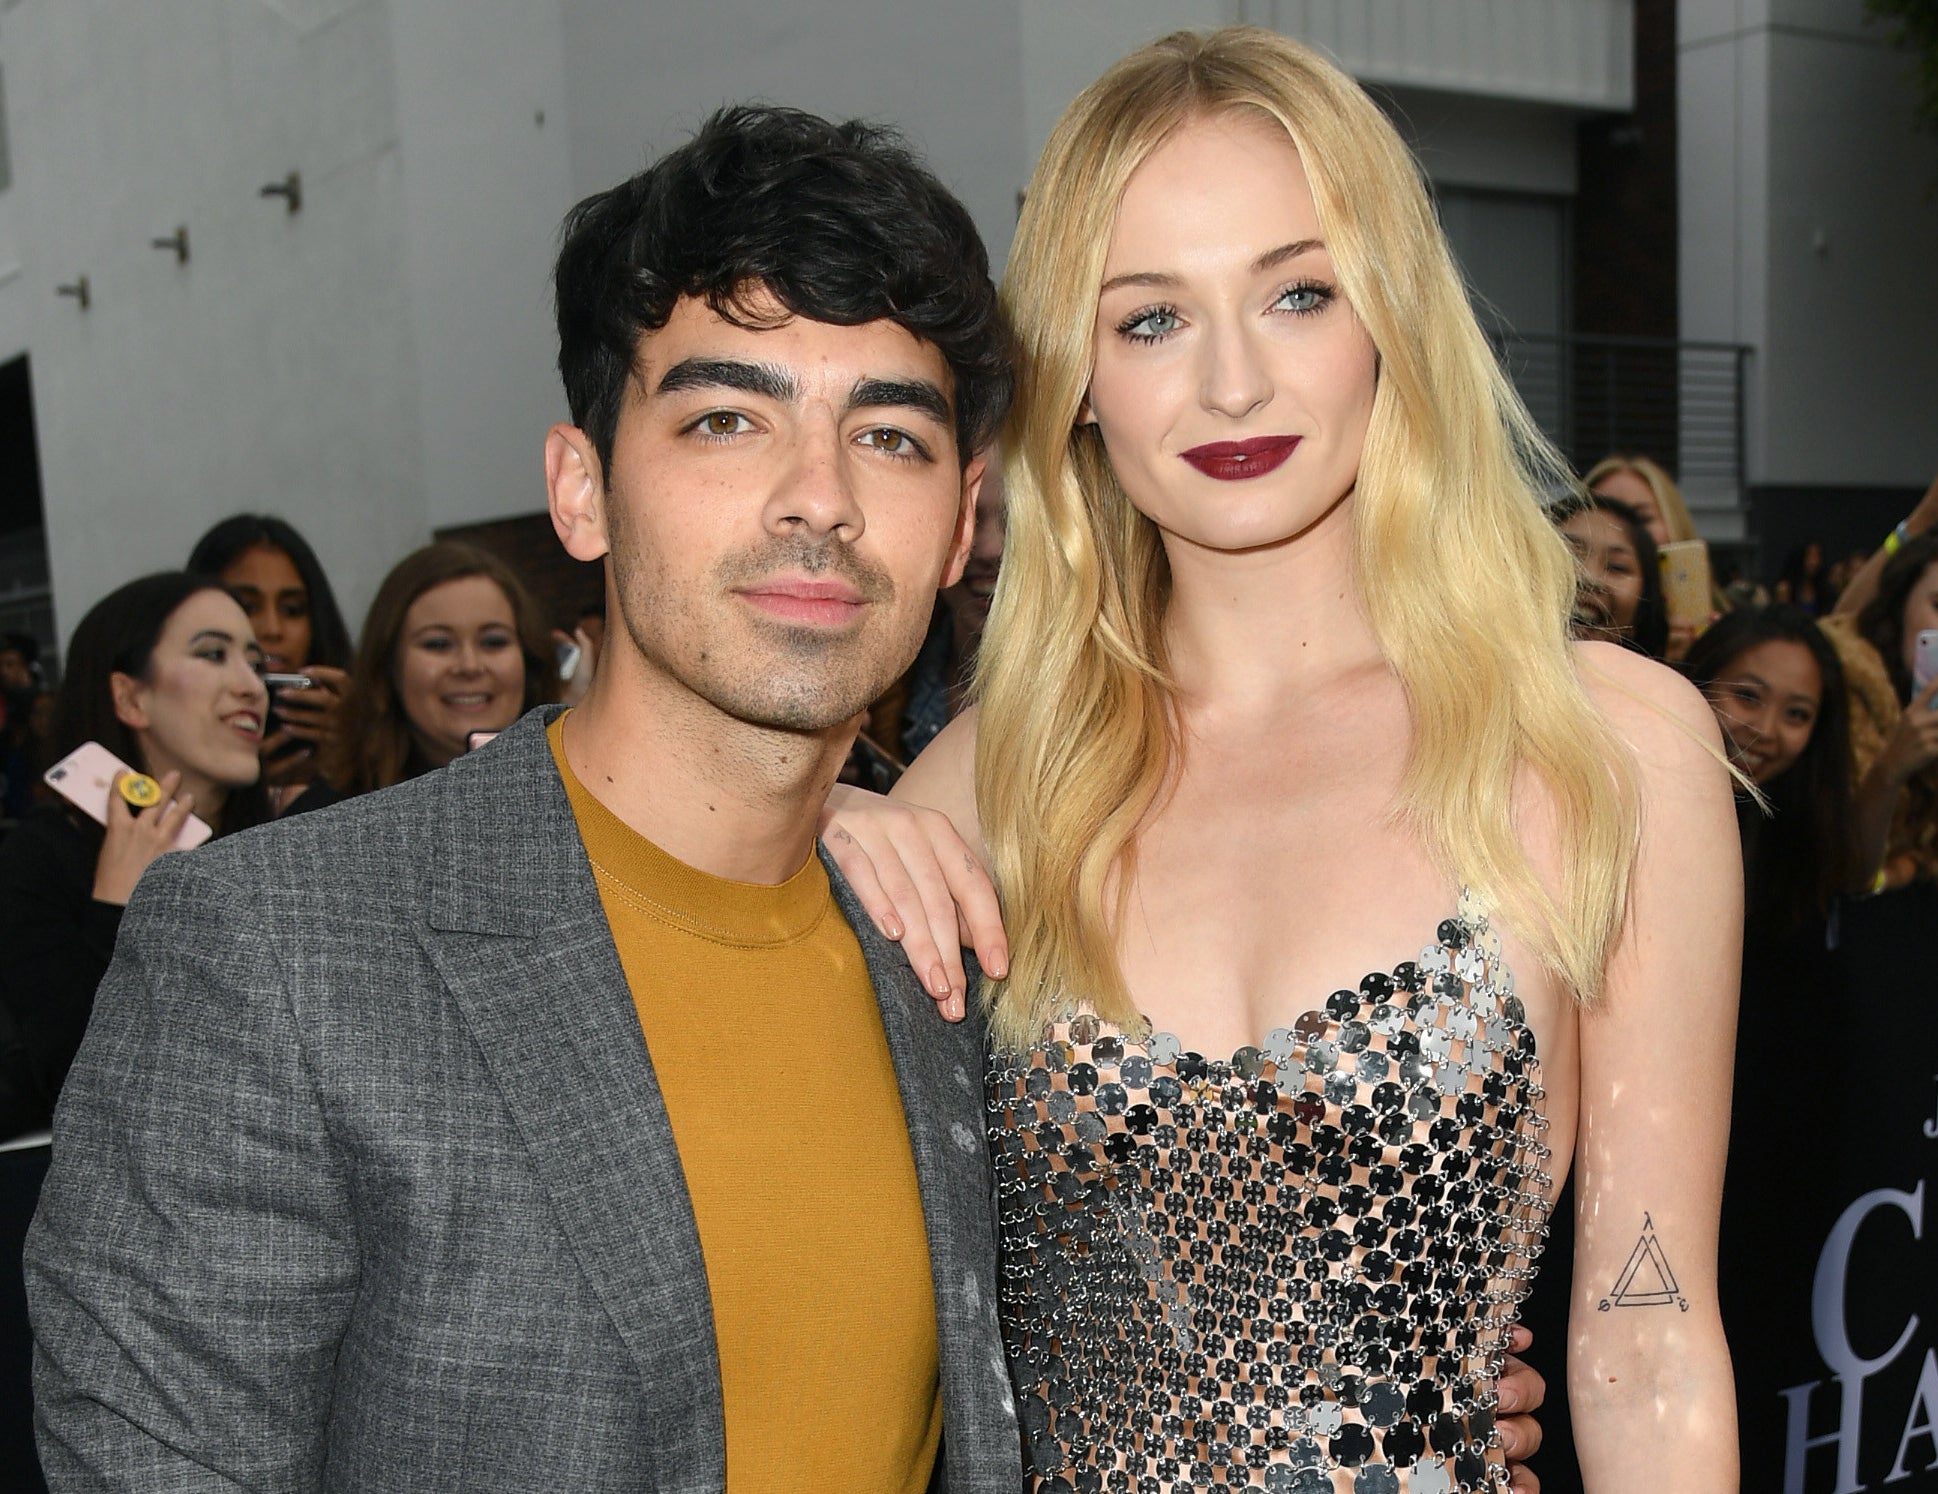 Sophie poses with Joe